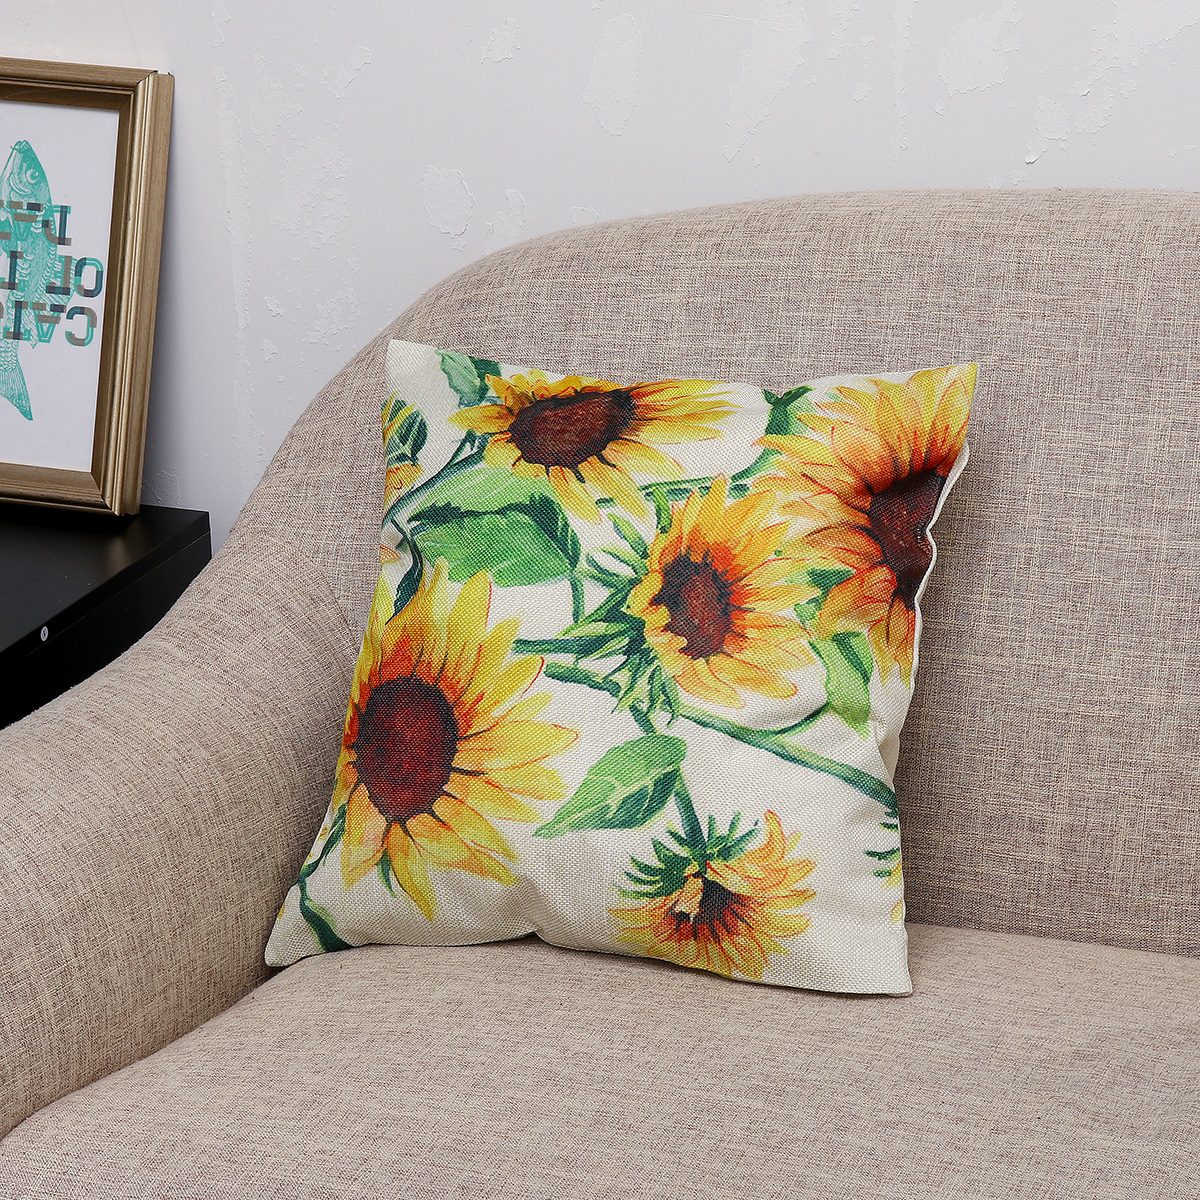 18x18inch-Square-Linen-Sunflowers-Cushion-Pillow-Case-Protective-Cover-1829530-4